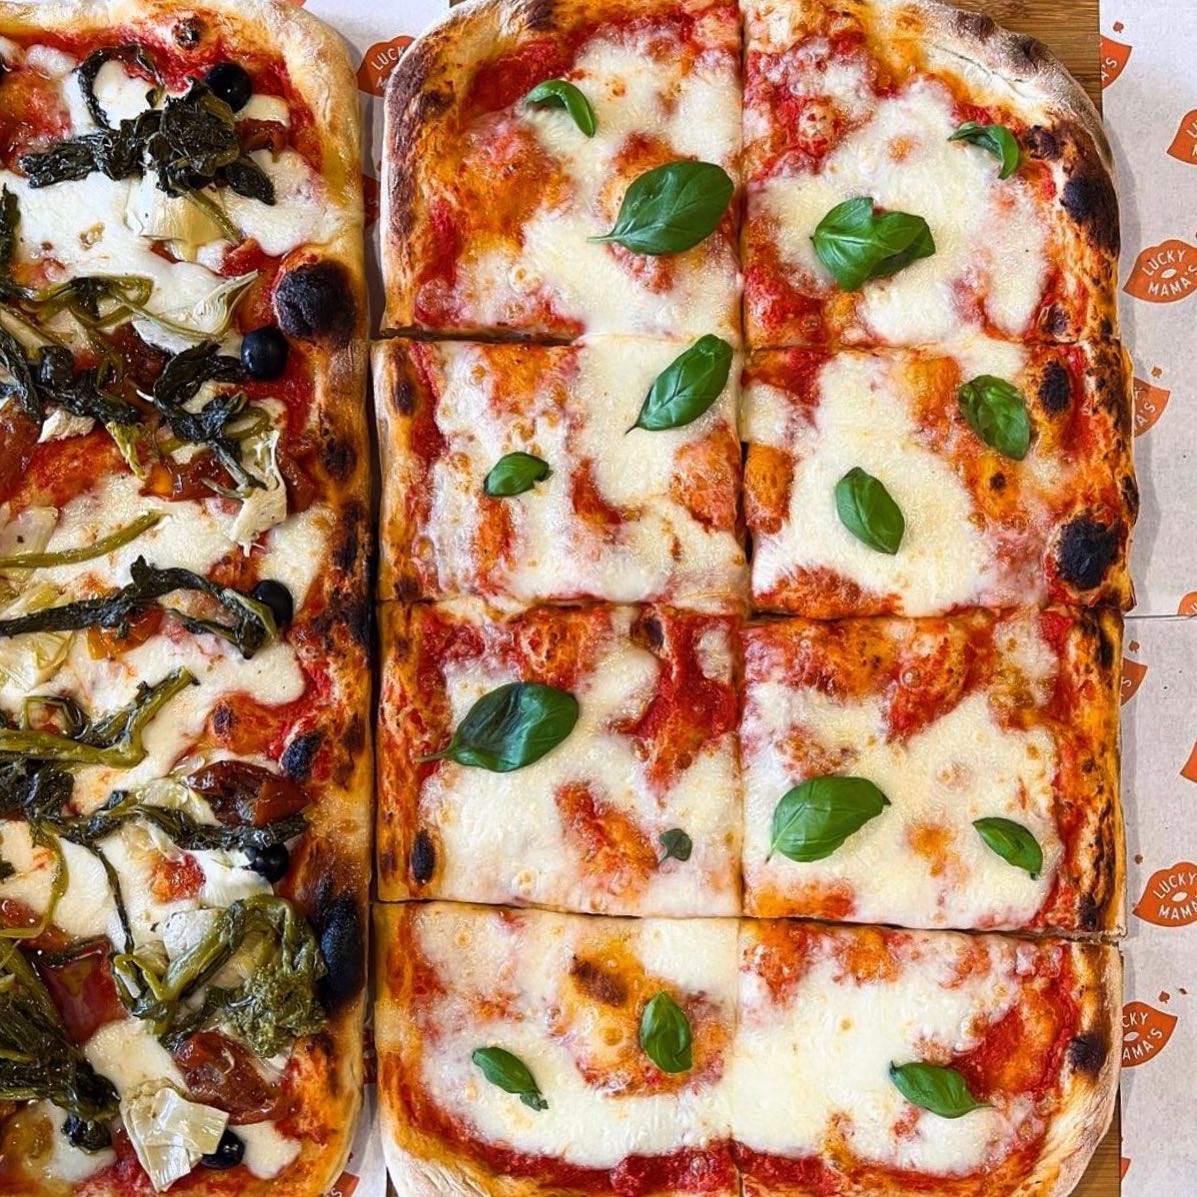 An all-vegan pizza festival is coming to Manchester next month, The Manc